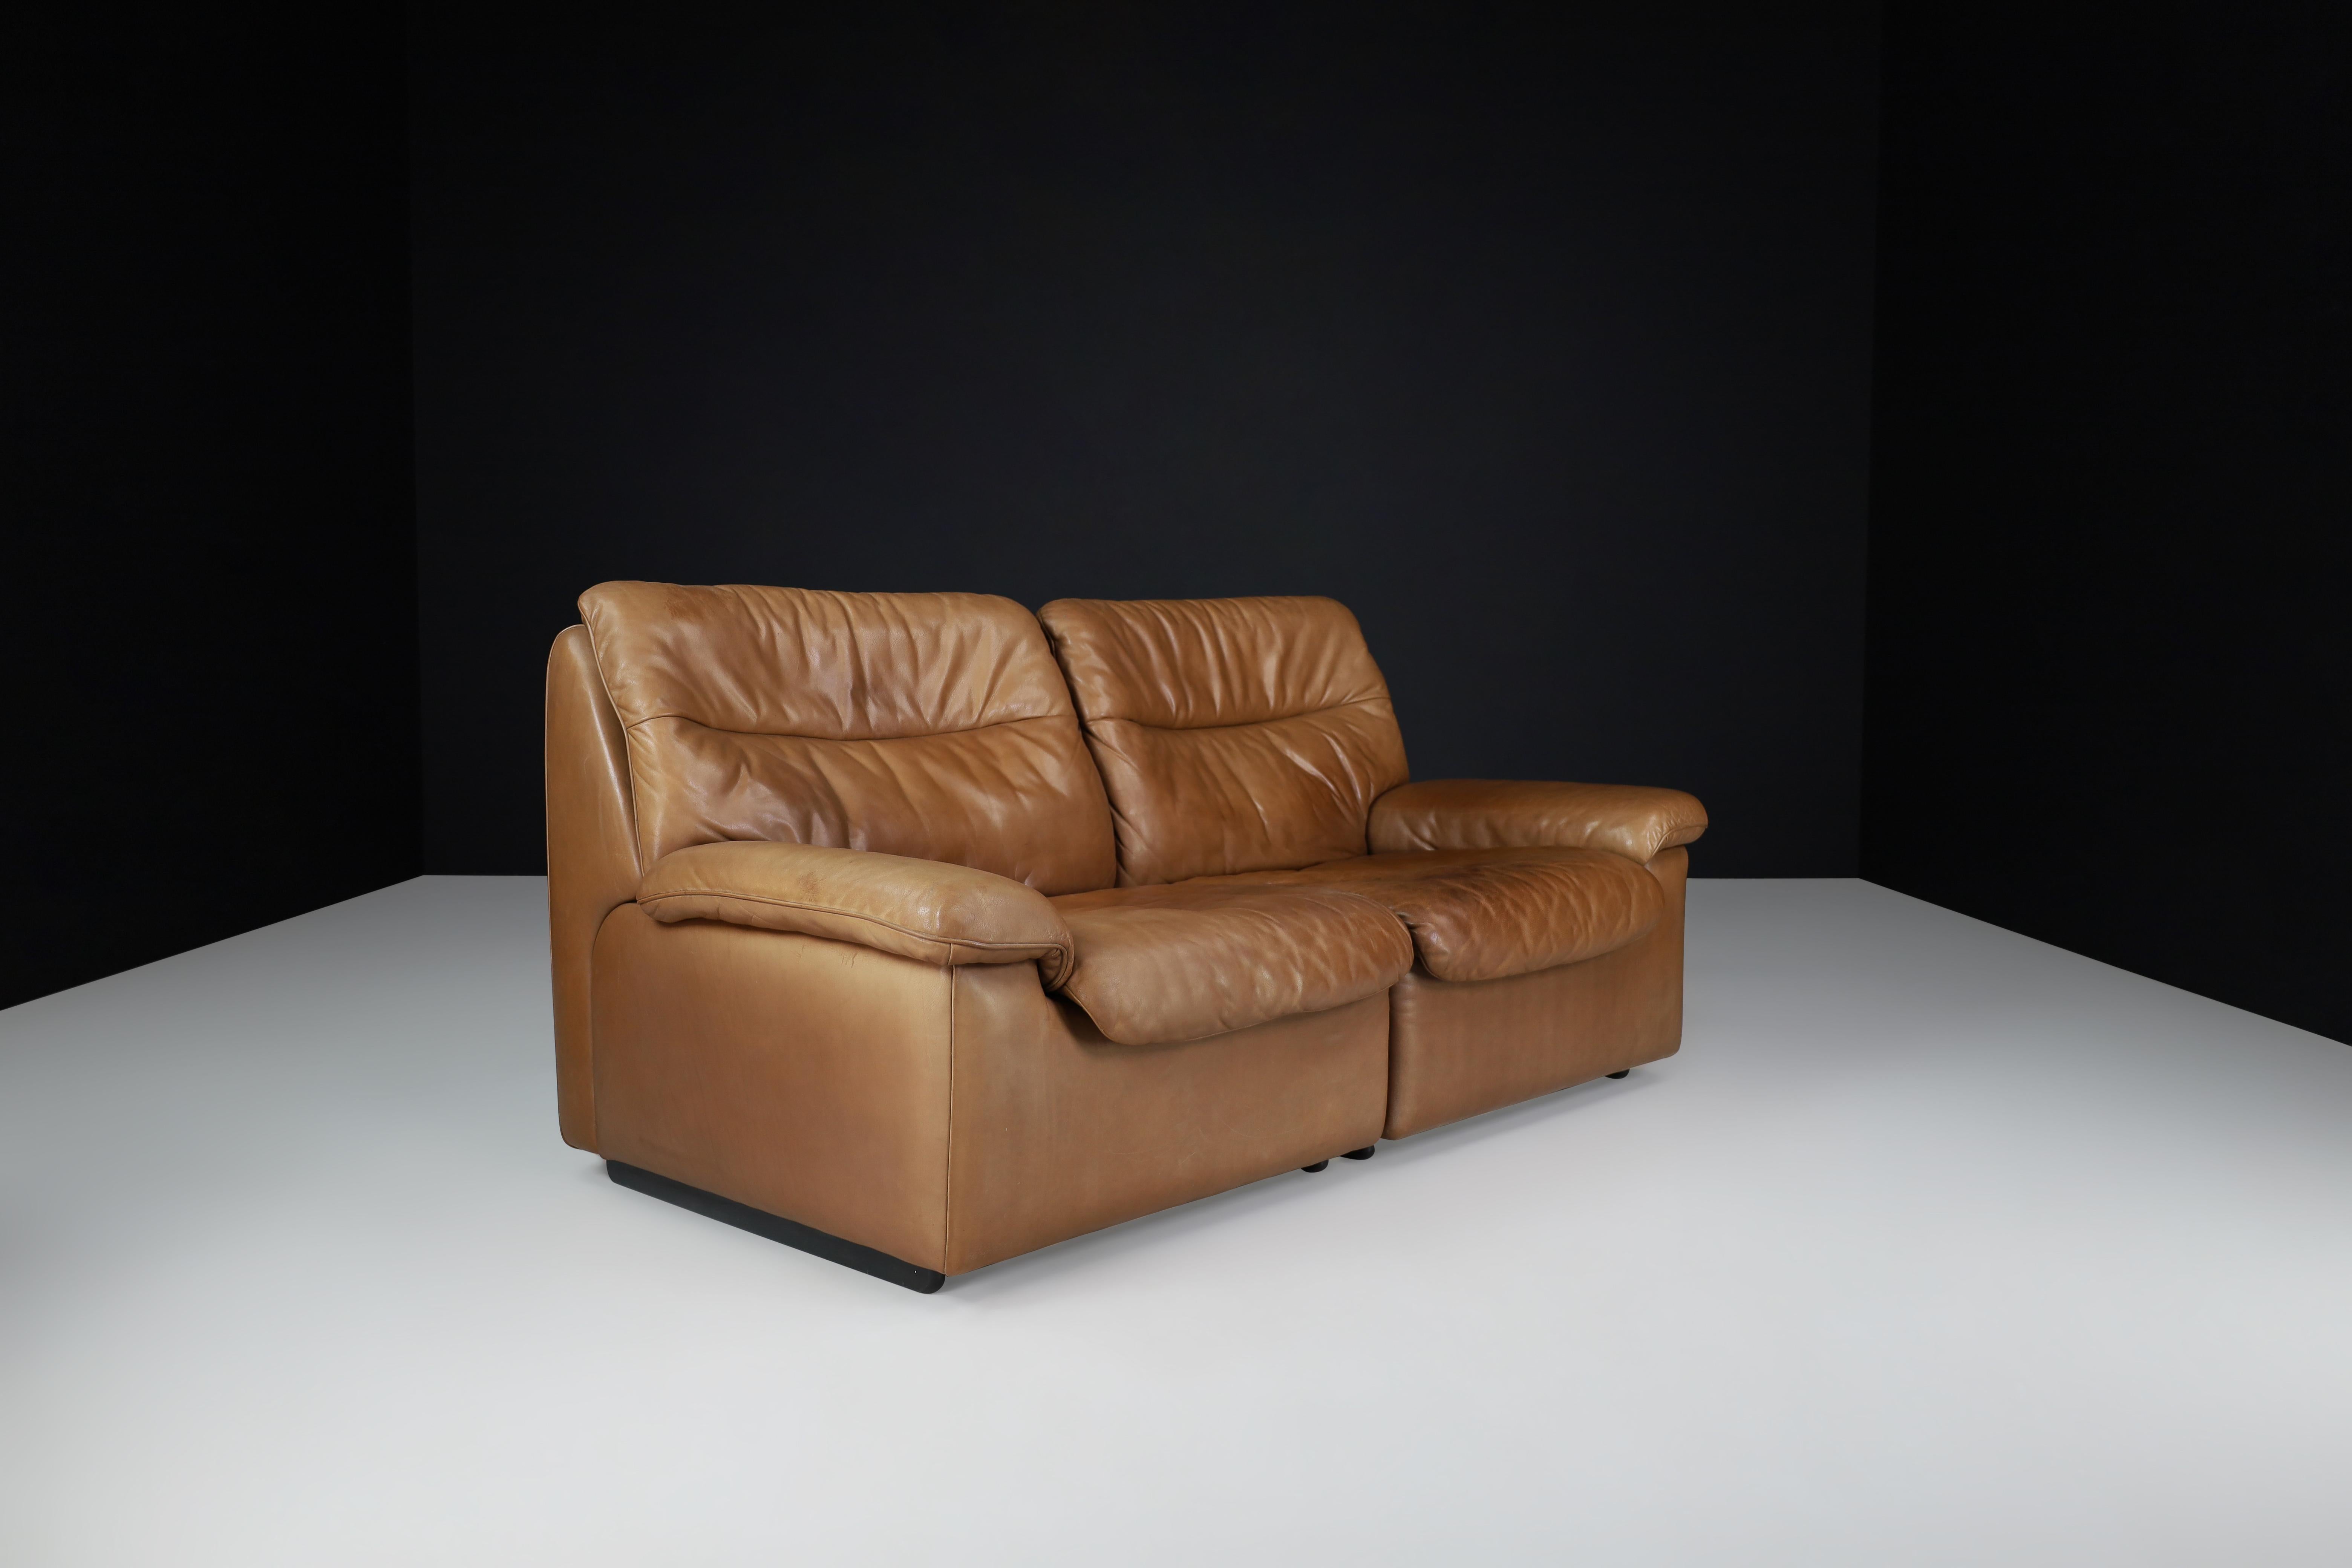 De Sede DS 63 two-seater sofa in patinated leather, Switzerland 1970s

Robust DS-63 modular two-seater sofa. This De Sede sofa ensures ultimate comfort and building quality with its solid wooden frame and thick hand-stitched leather upholstery.